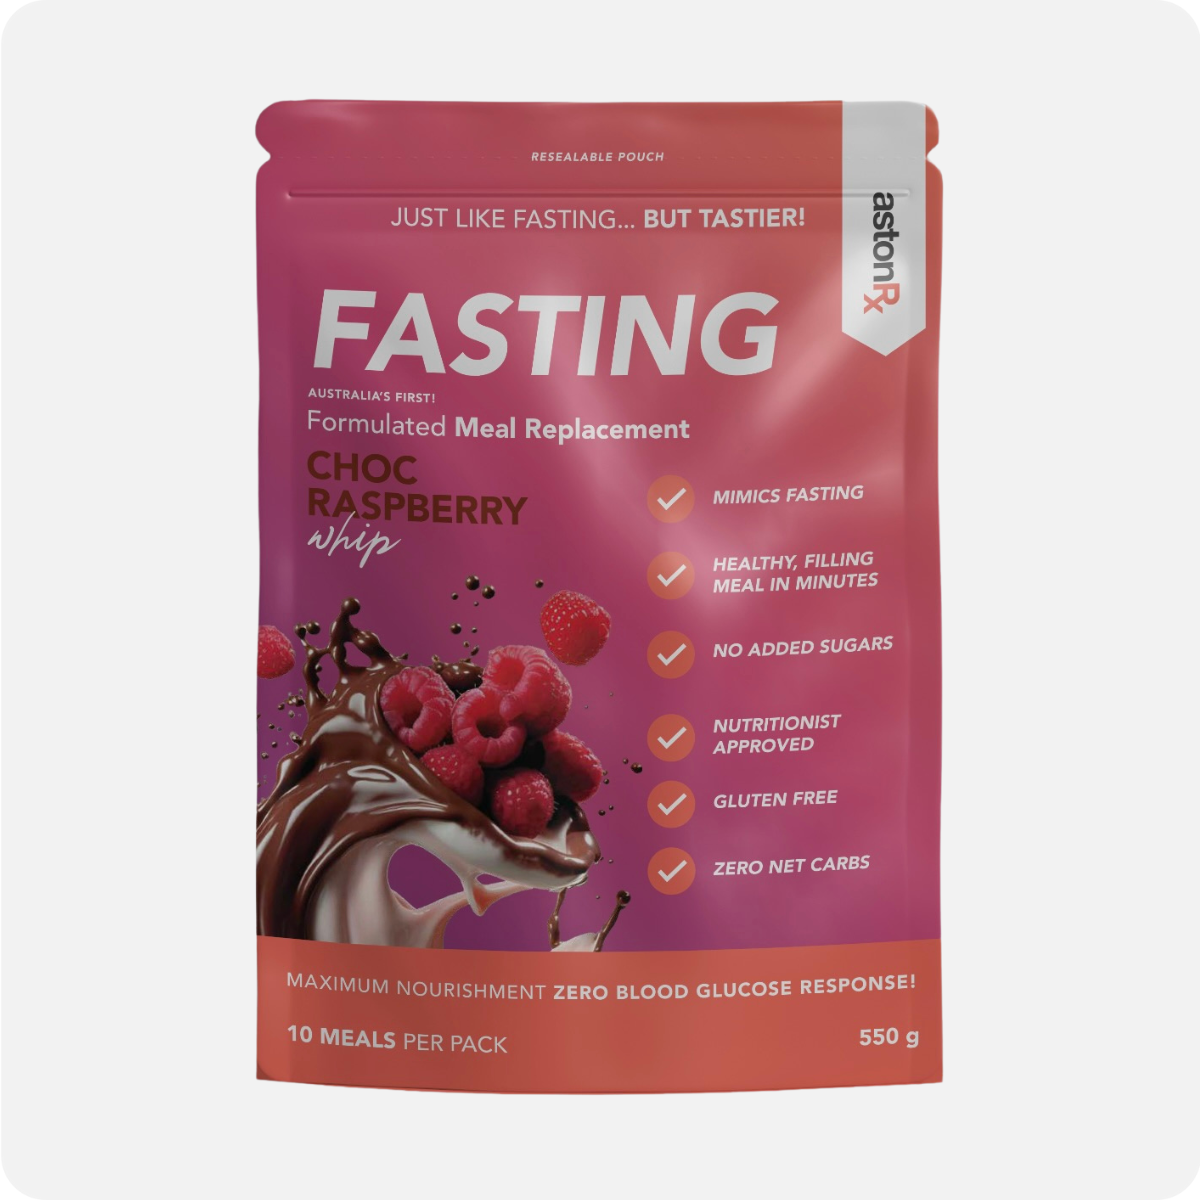 AstonRX Fasting Meal Replacement Shake